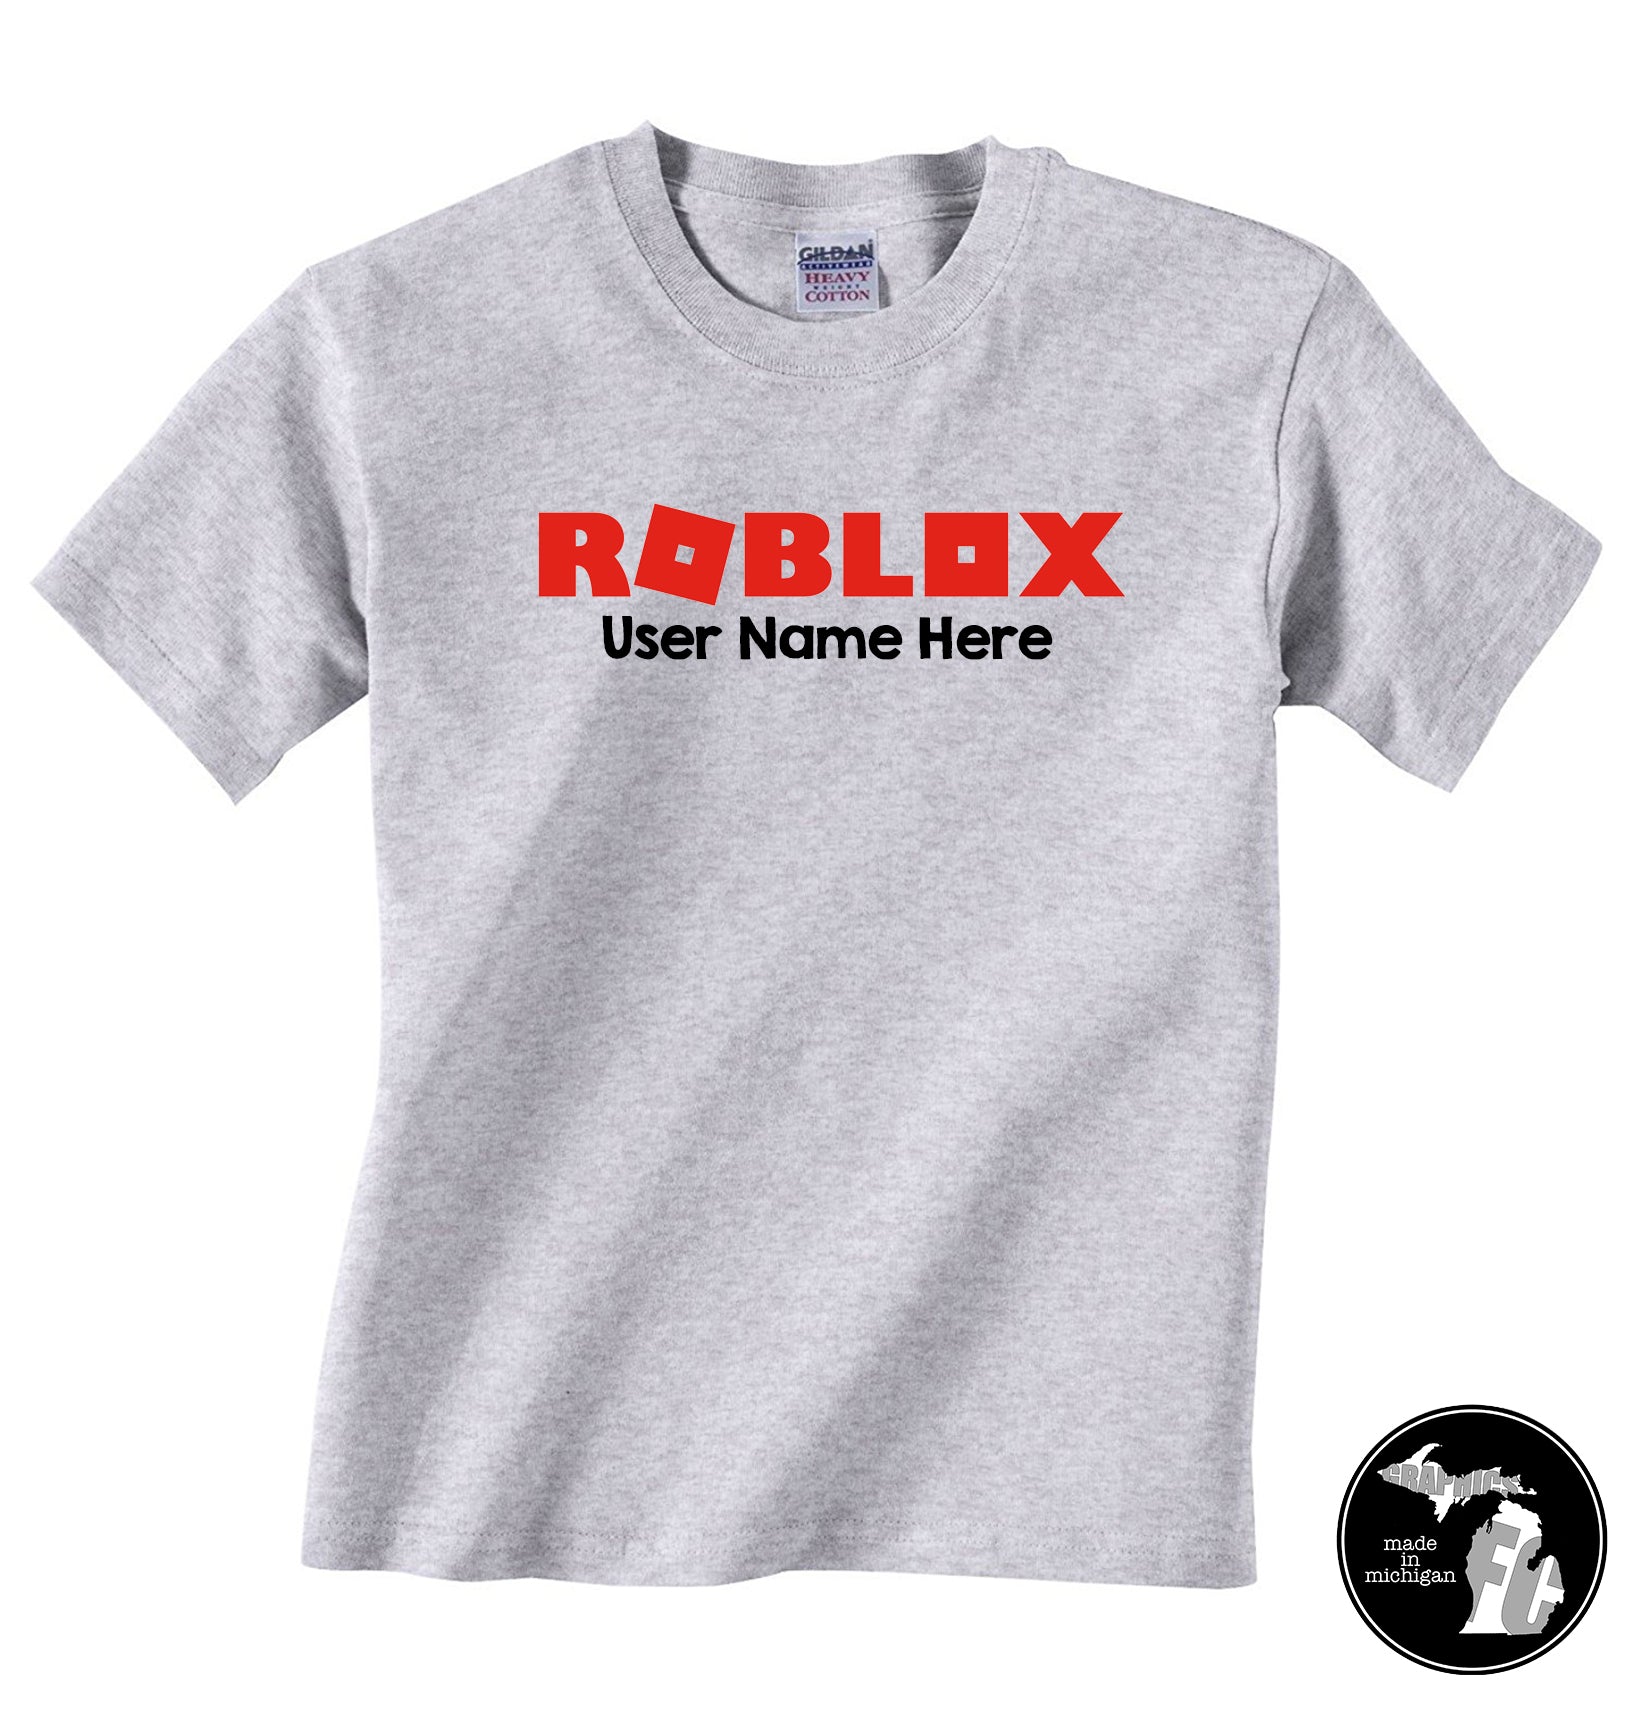 Roblox T Shirt With Personal User Name Kids Shirt Child Adults Furniture City Graphics - roblox t shirt foto